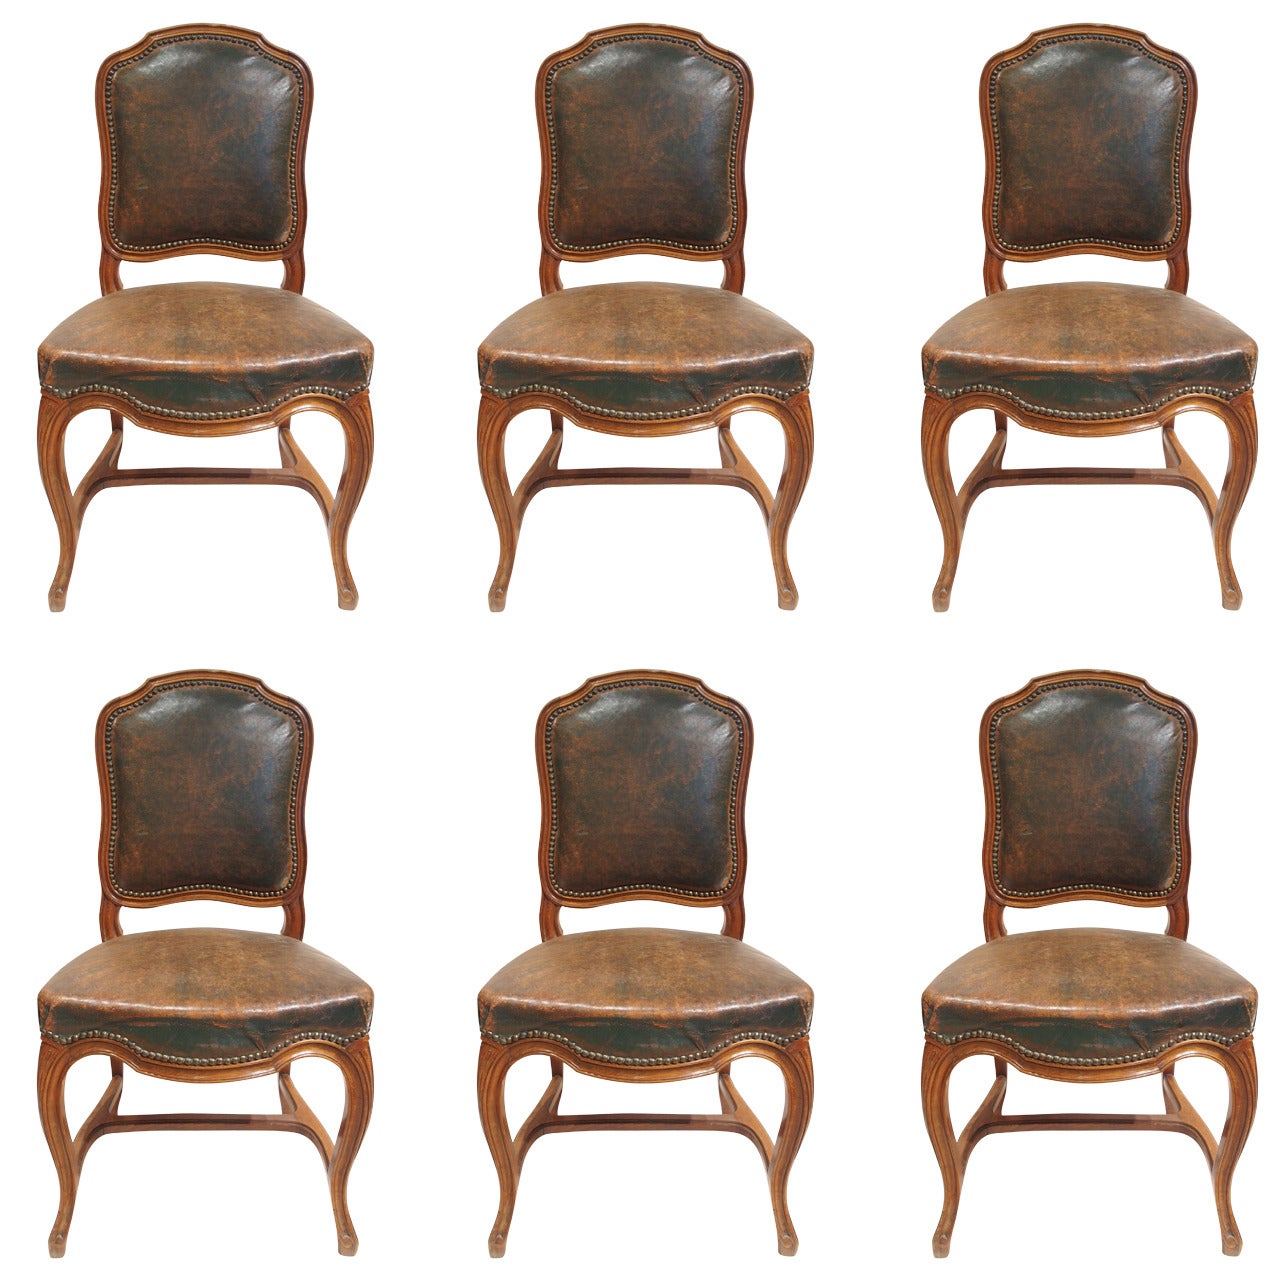 Small French Chair with Cabriole Leg in Green Leather, Set of Six